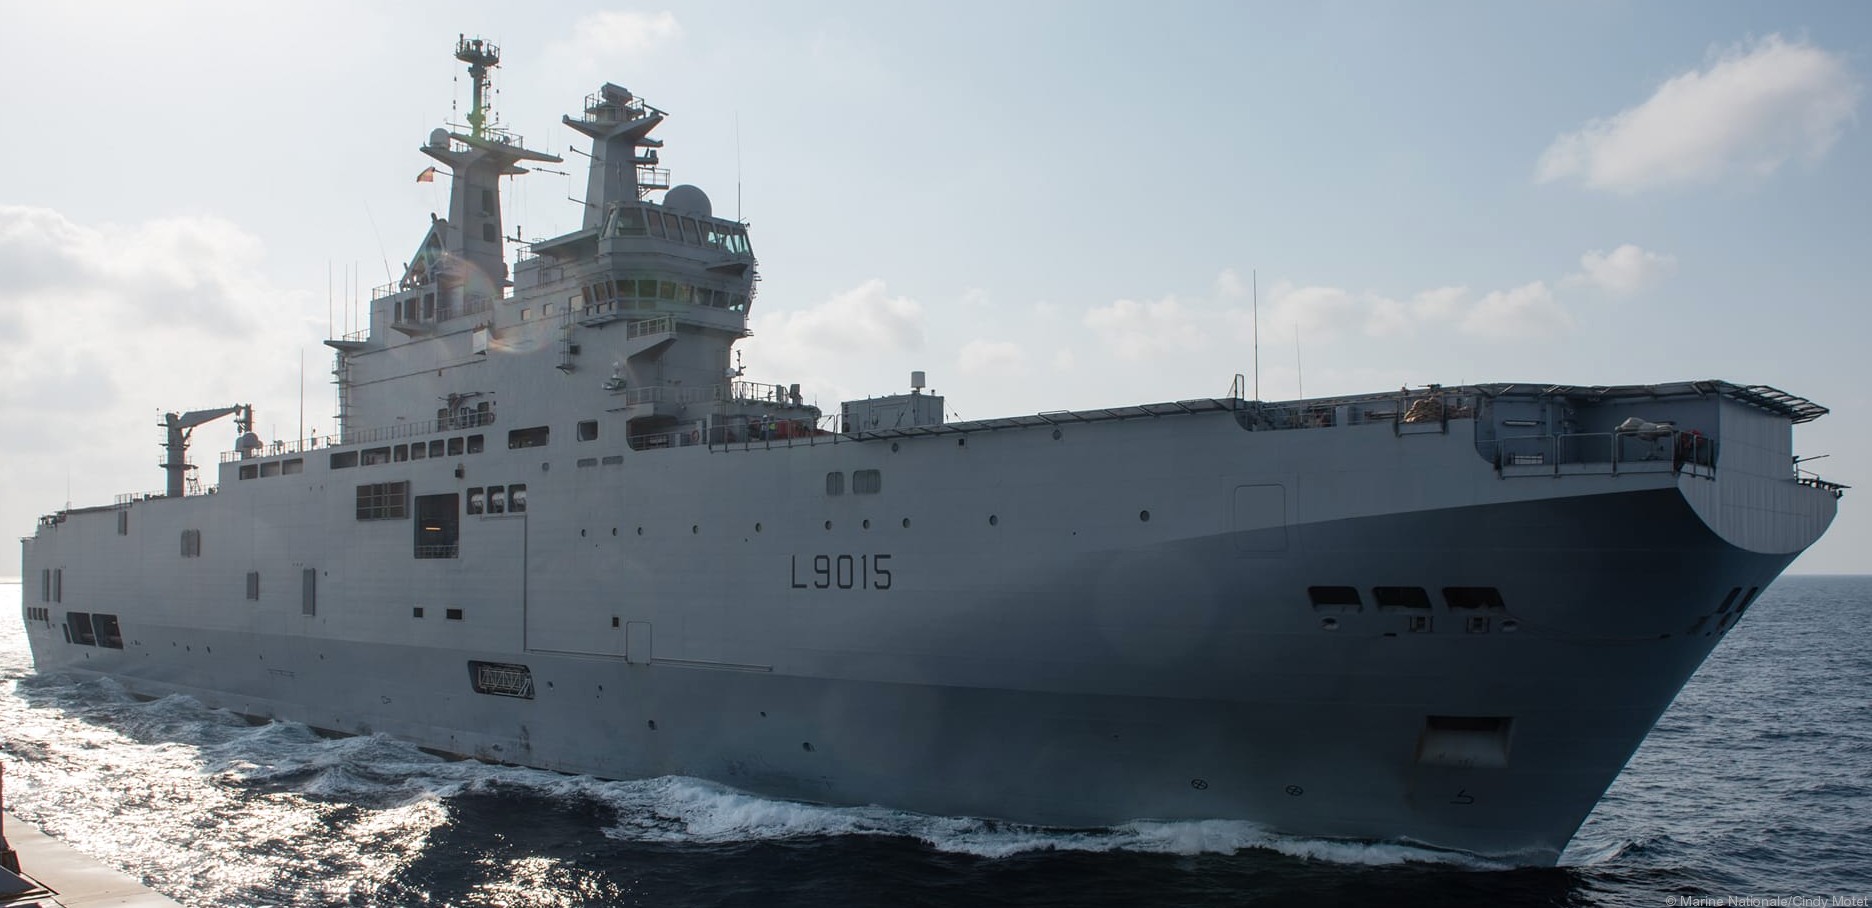 l-9015 fs dixmude mistral class amphibious assault command ship bpc french navy marine nationale 65